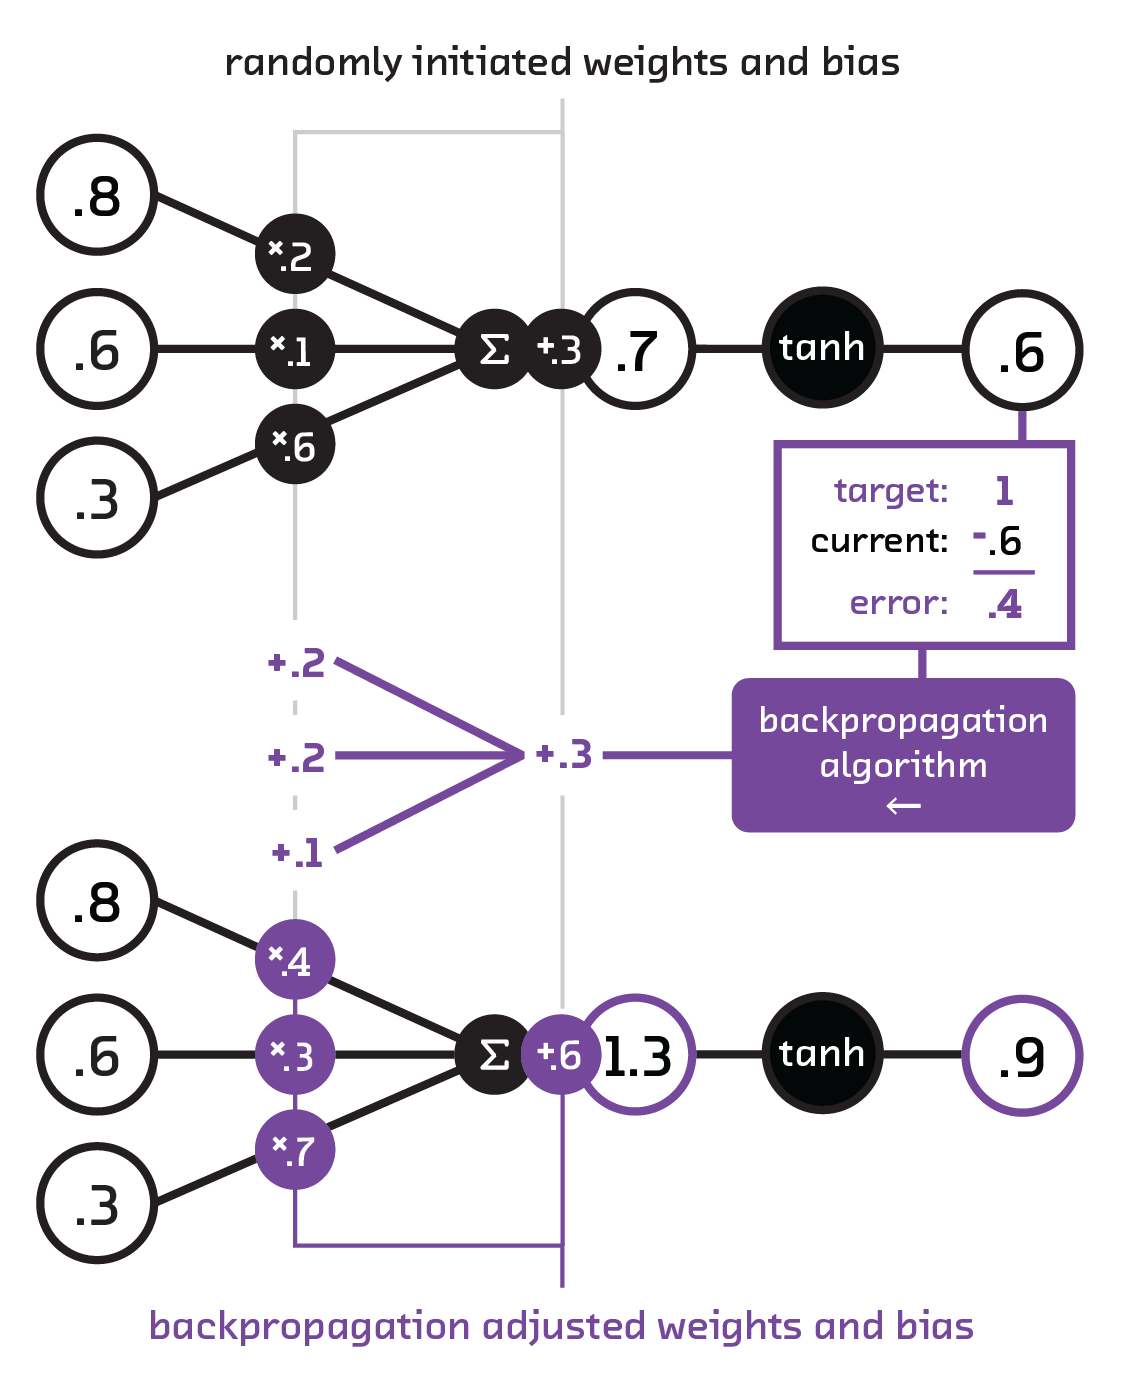 Backpropagation adjusts weights and biases to better match target results.